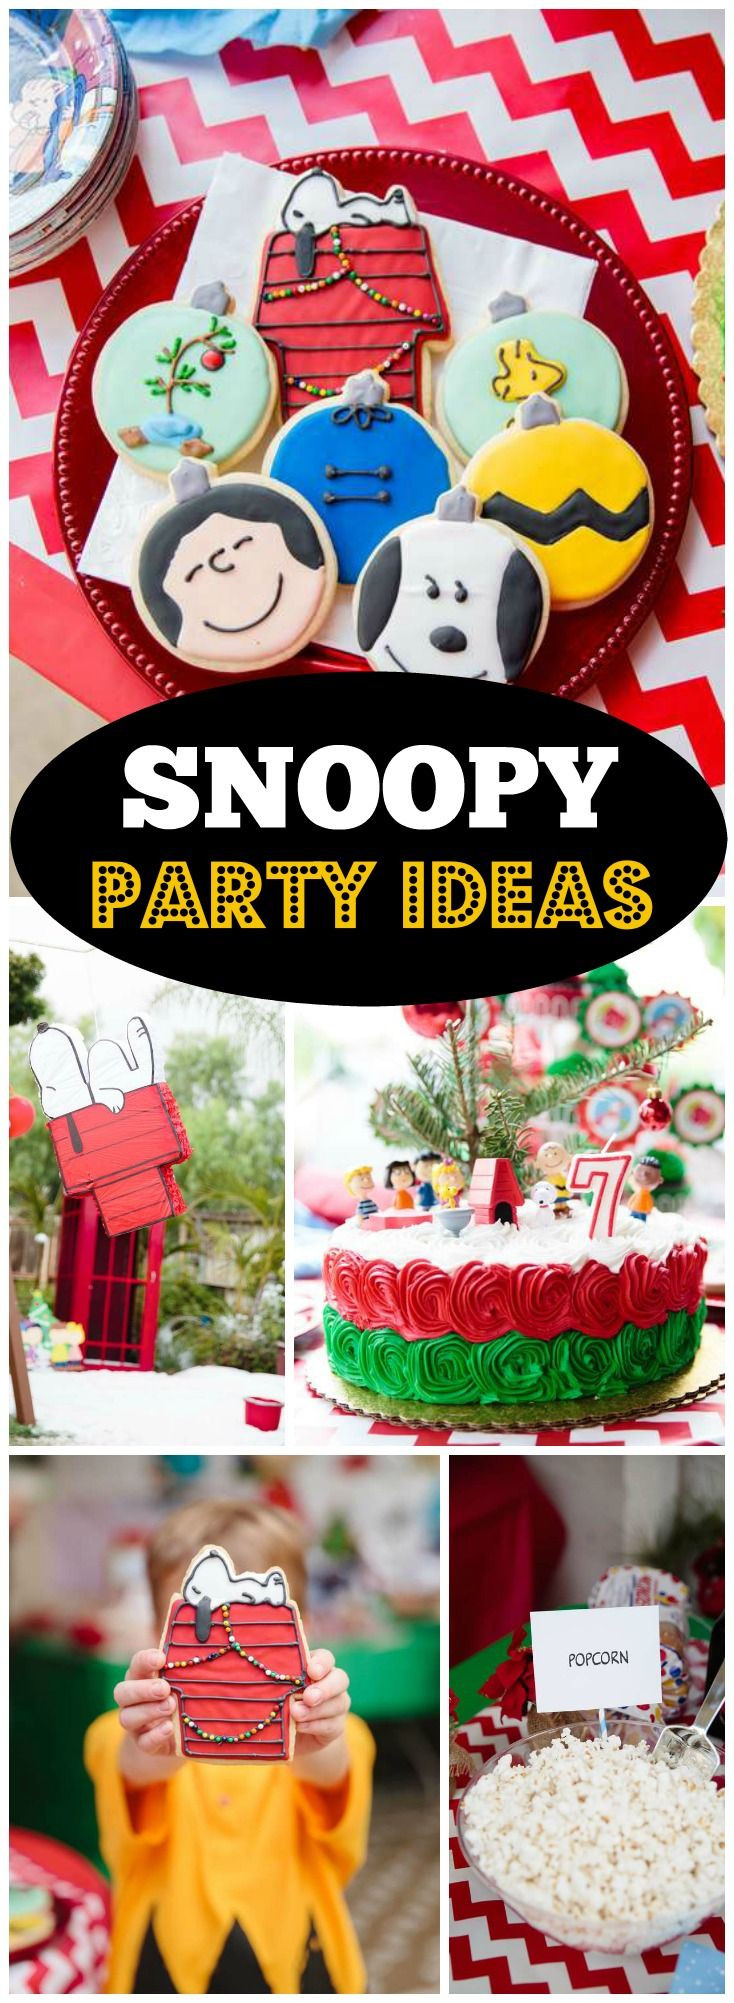 Charlie Brown Christmas Party Ideas
 17 Best images about Christmas Desserts and Treats on